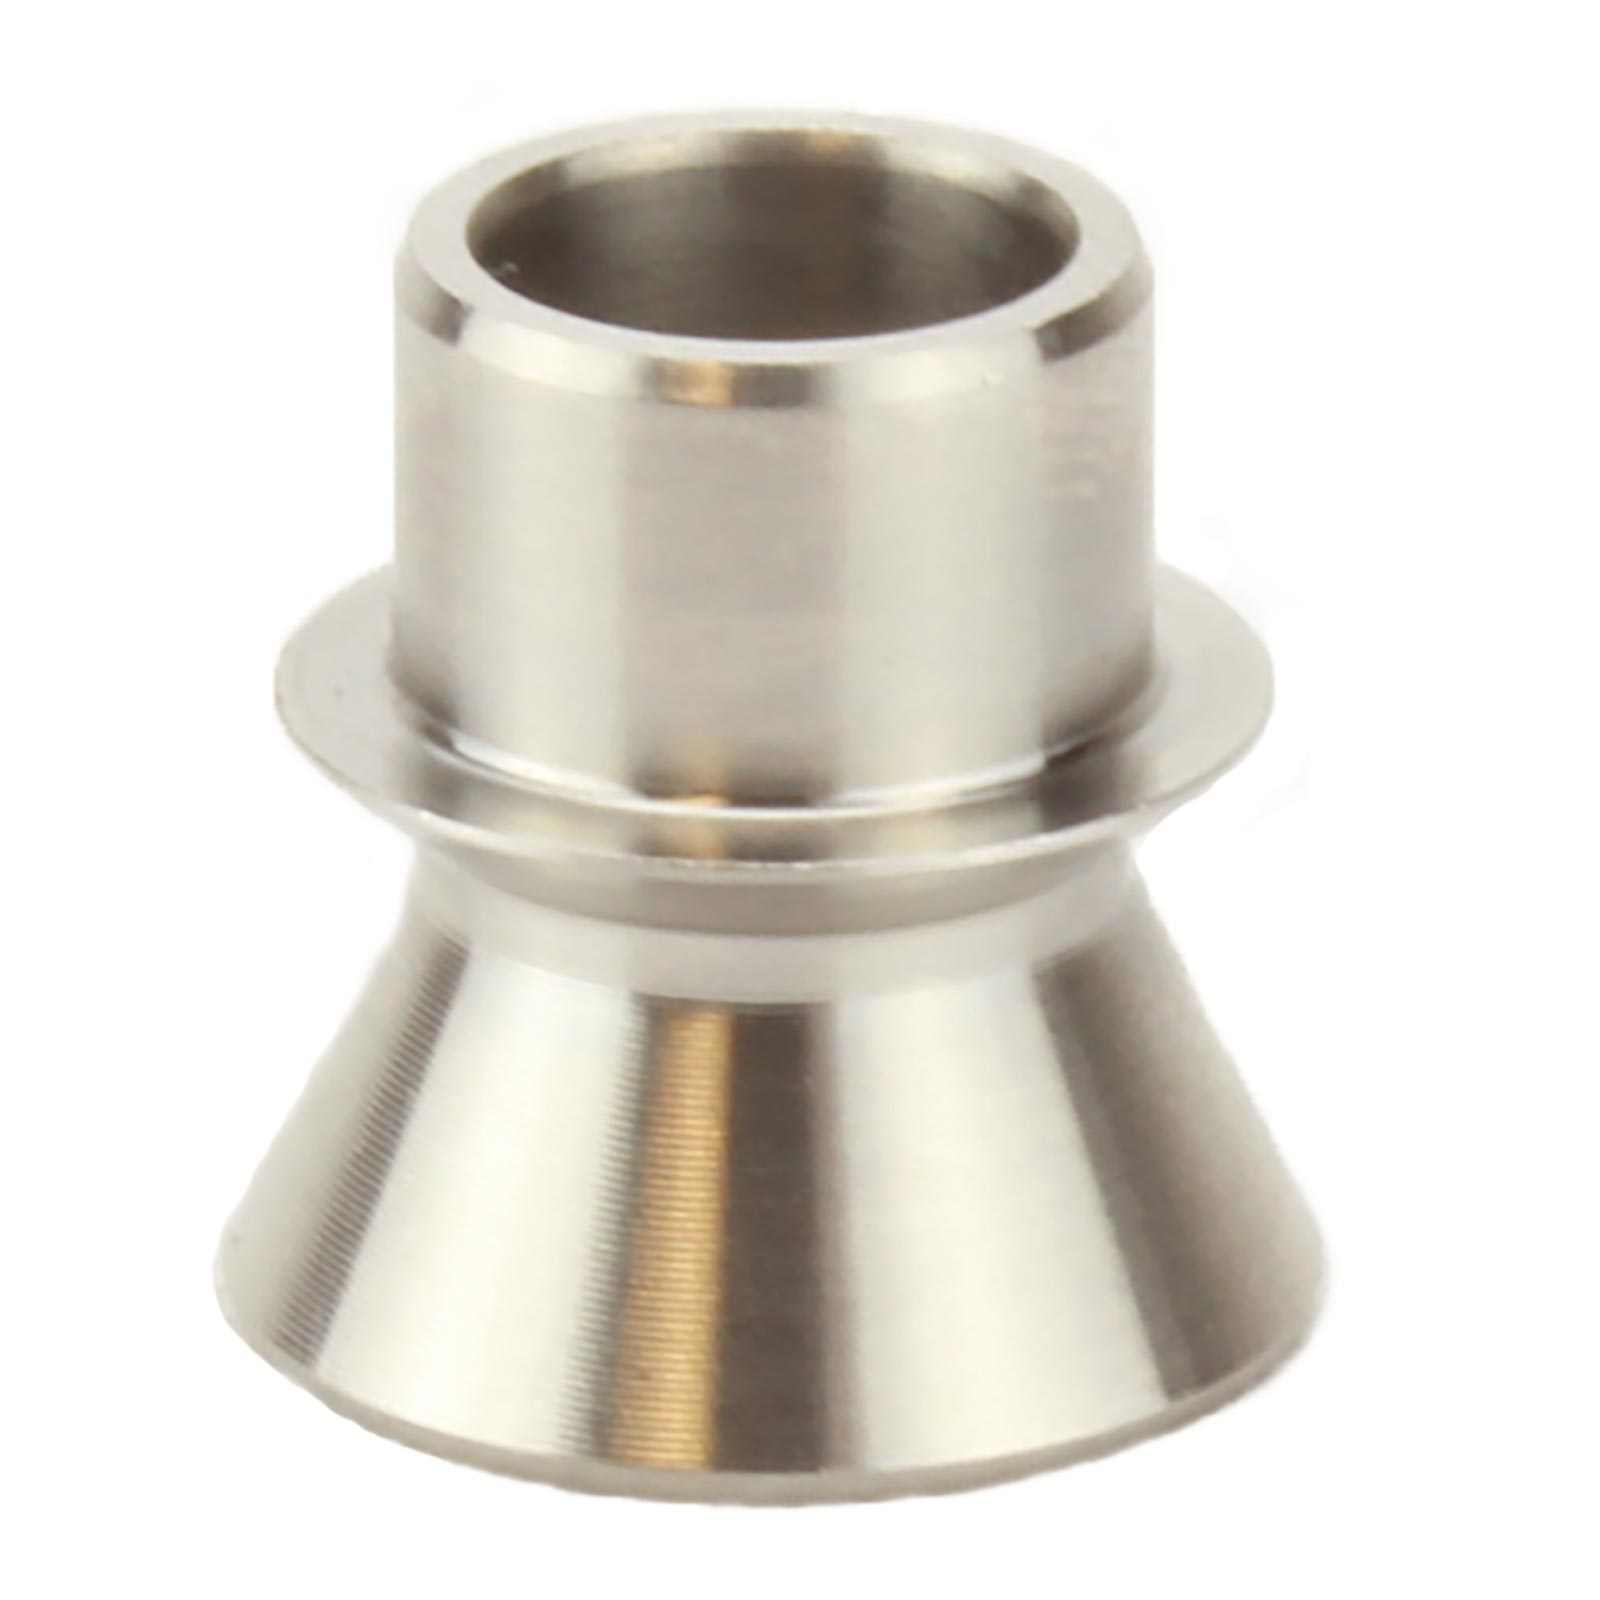 RuffStuff Specialties R1056 5/8 Inch To 1/2 Inch Stainless Steel Spherical Rod Heim Joint Misalignment Spacer Bushing 